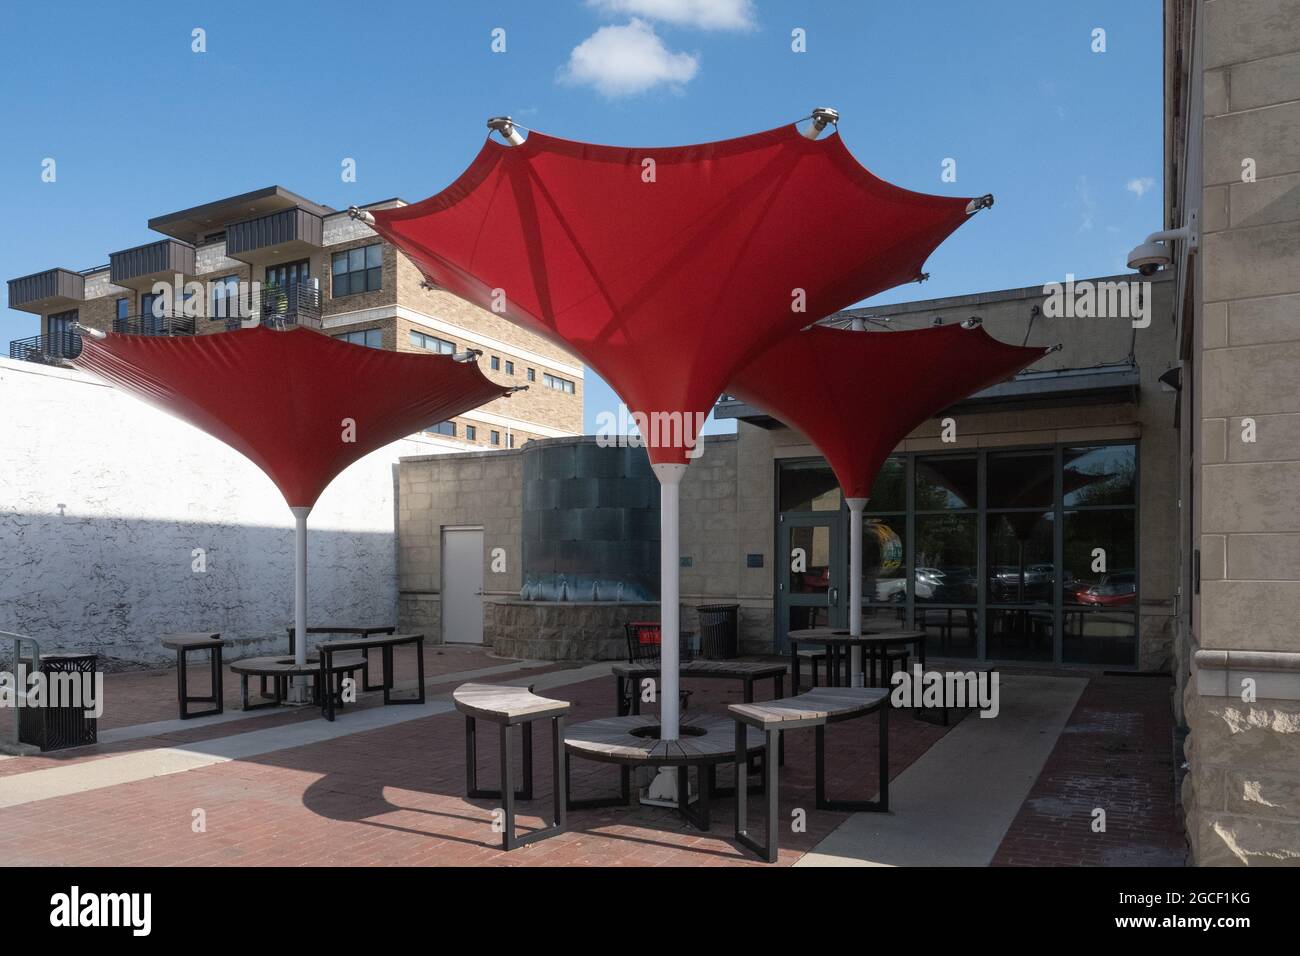 Sunshades for outside seating benches in shape of large red inverted umbrellas Georgetown, Texas USA Stock Photo